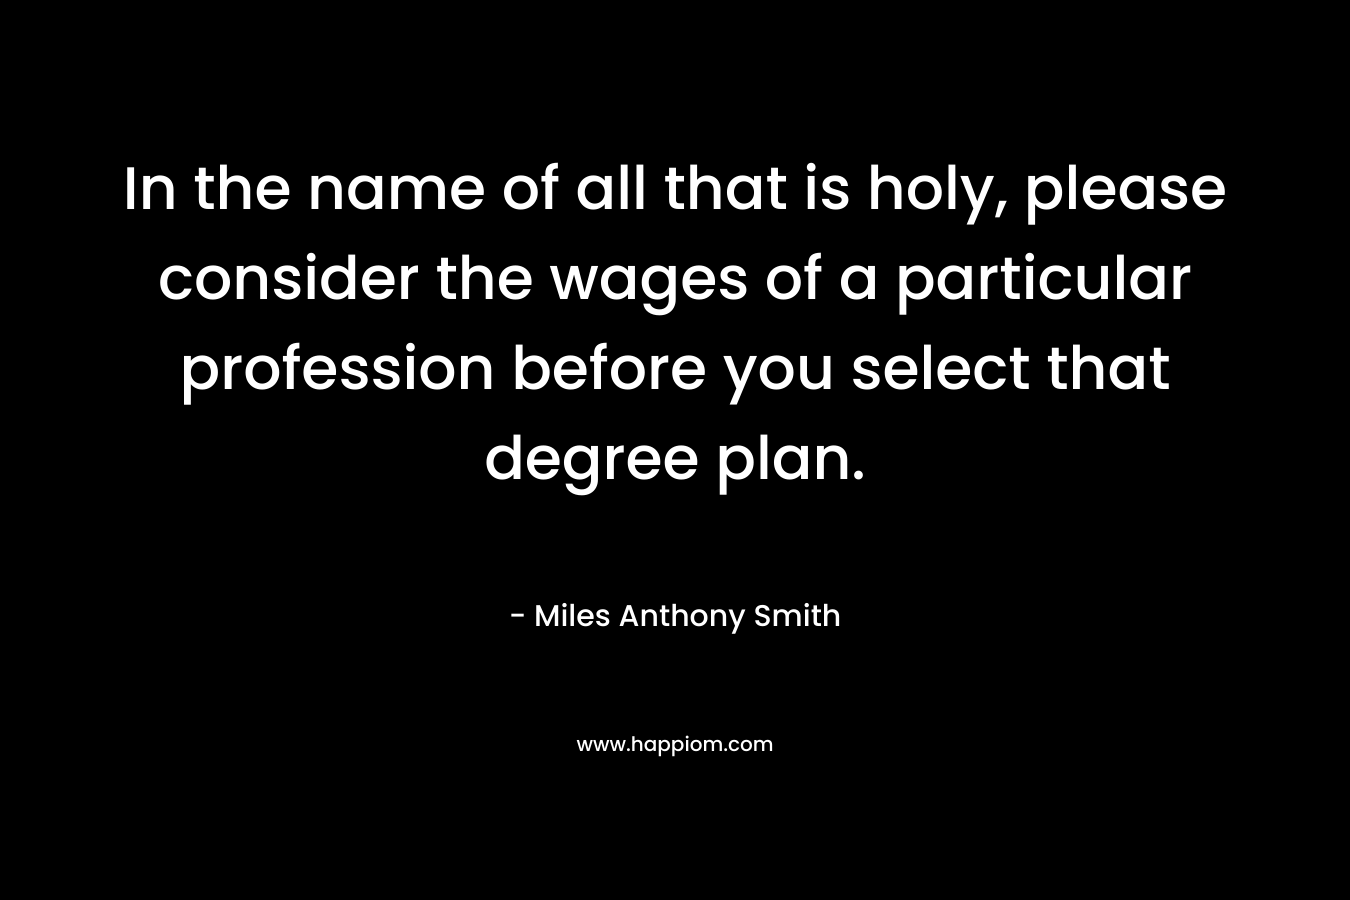 In the name of all that is holy, please consider the wages of a particular profession before you select that degree plan.